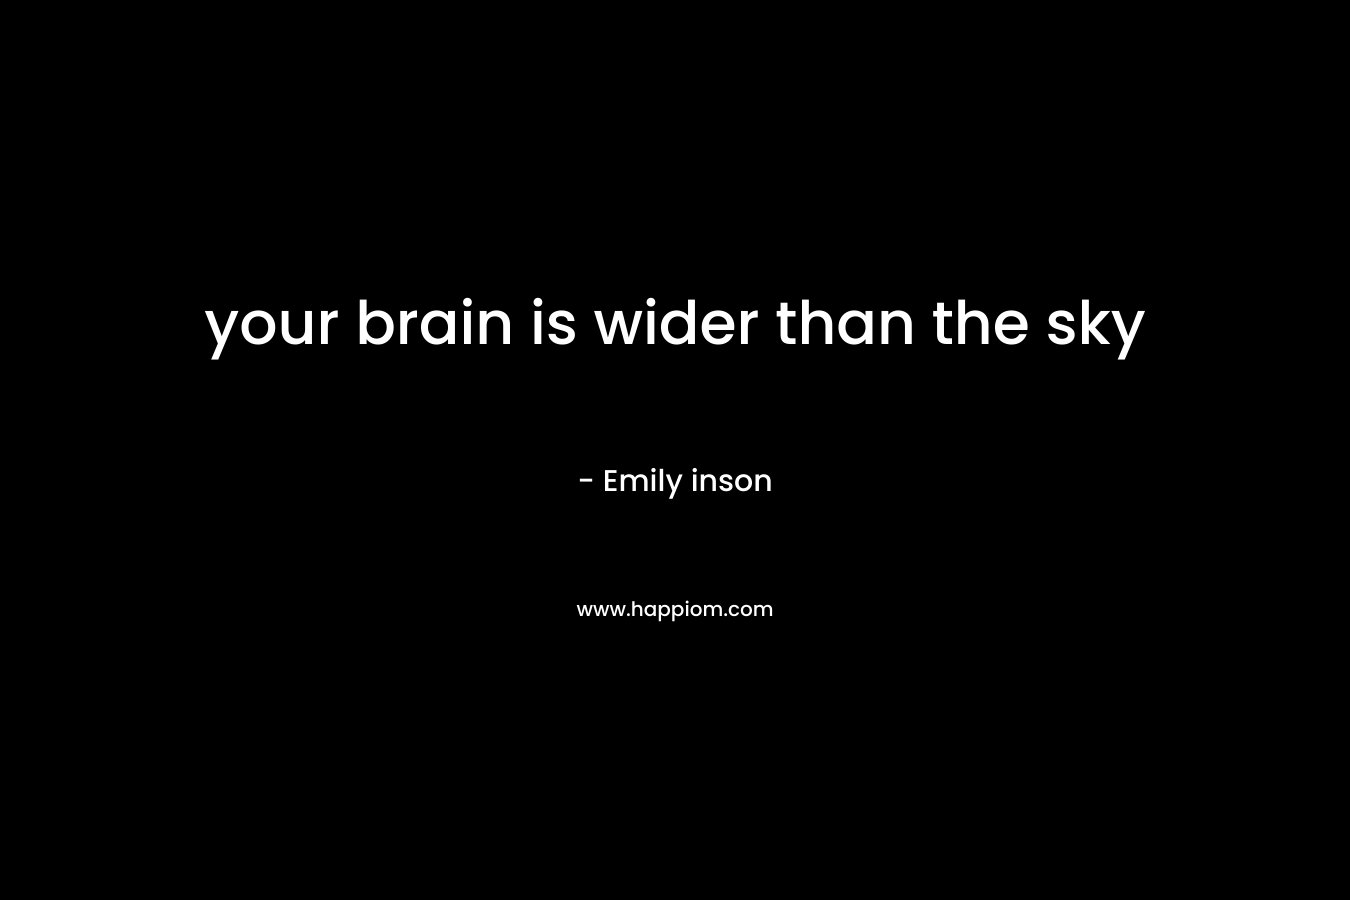 your brain is wider than the sky